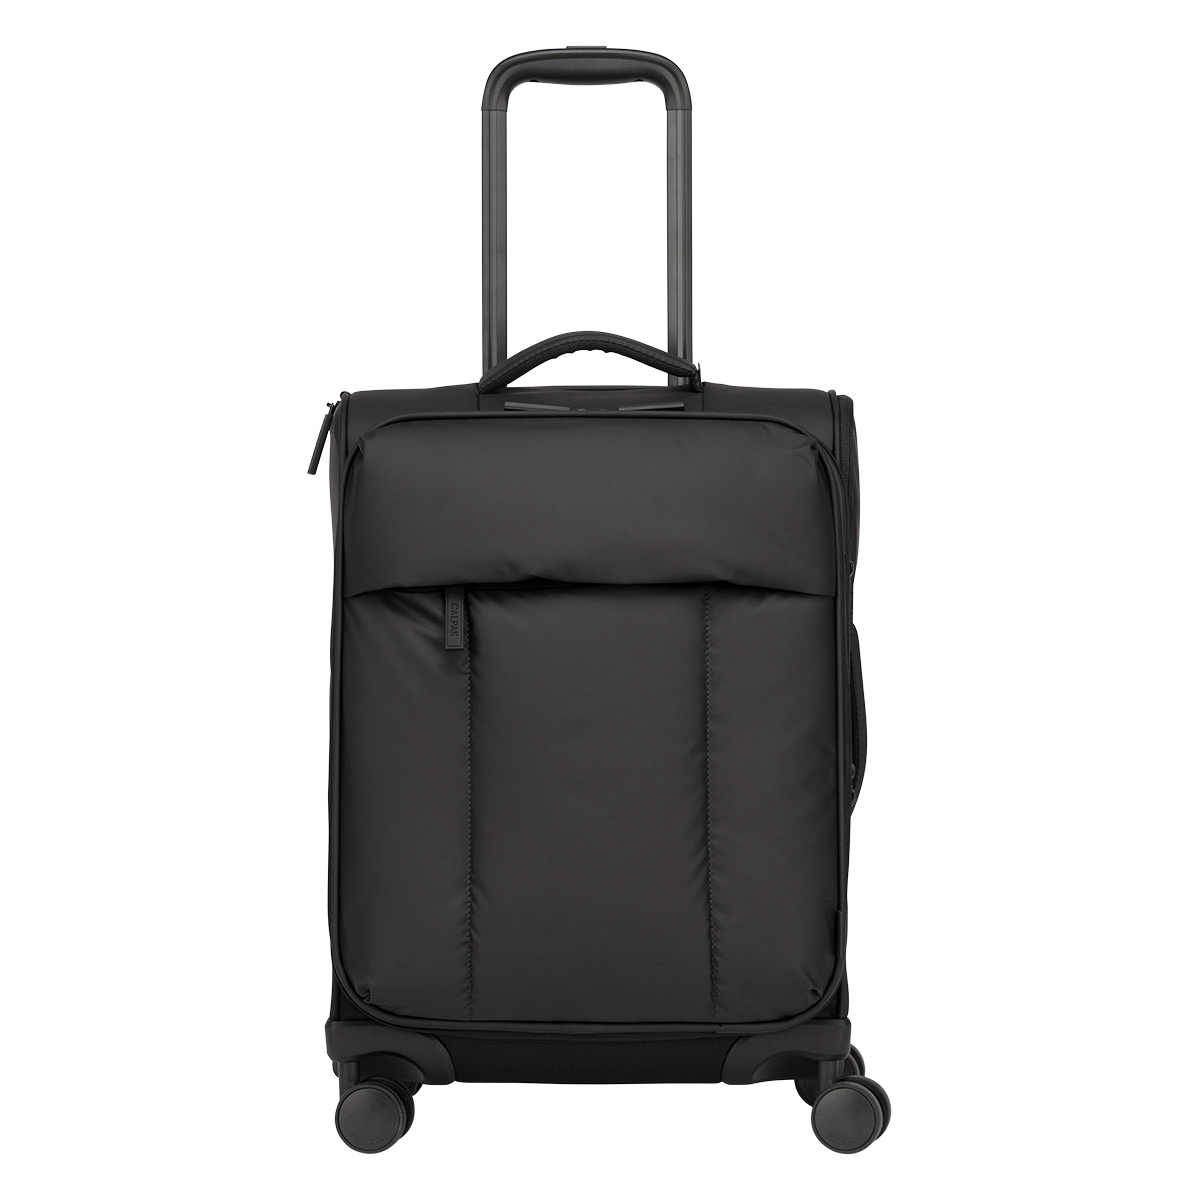 CALPAK Luka Soft-Sided Carry-on Luggage | The Container Store